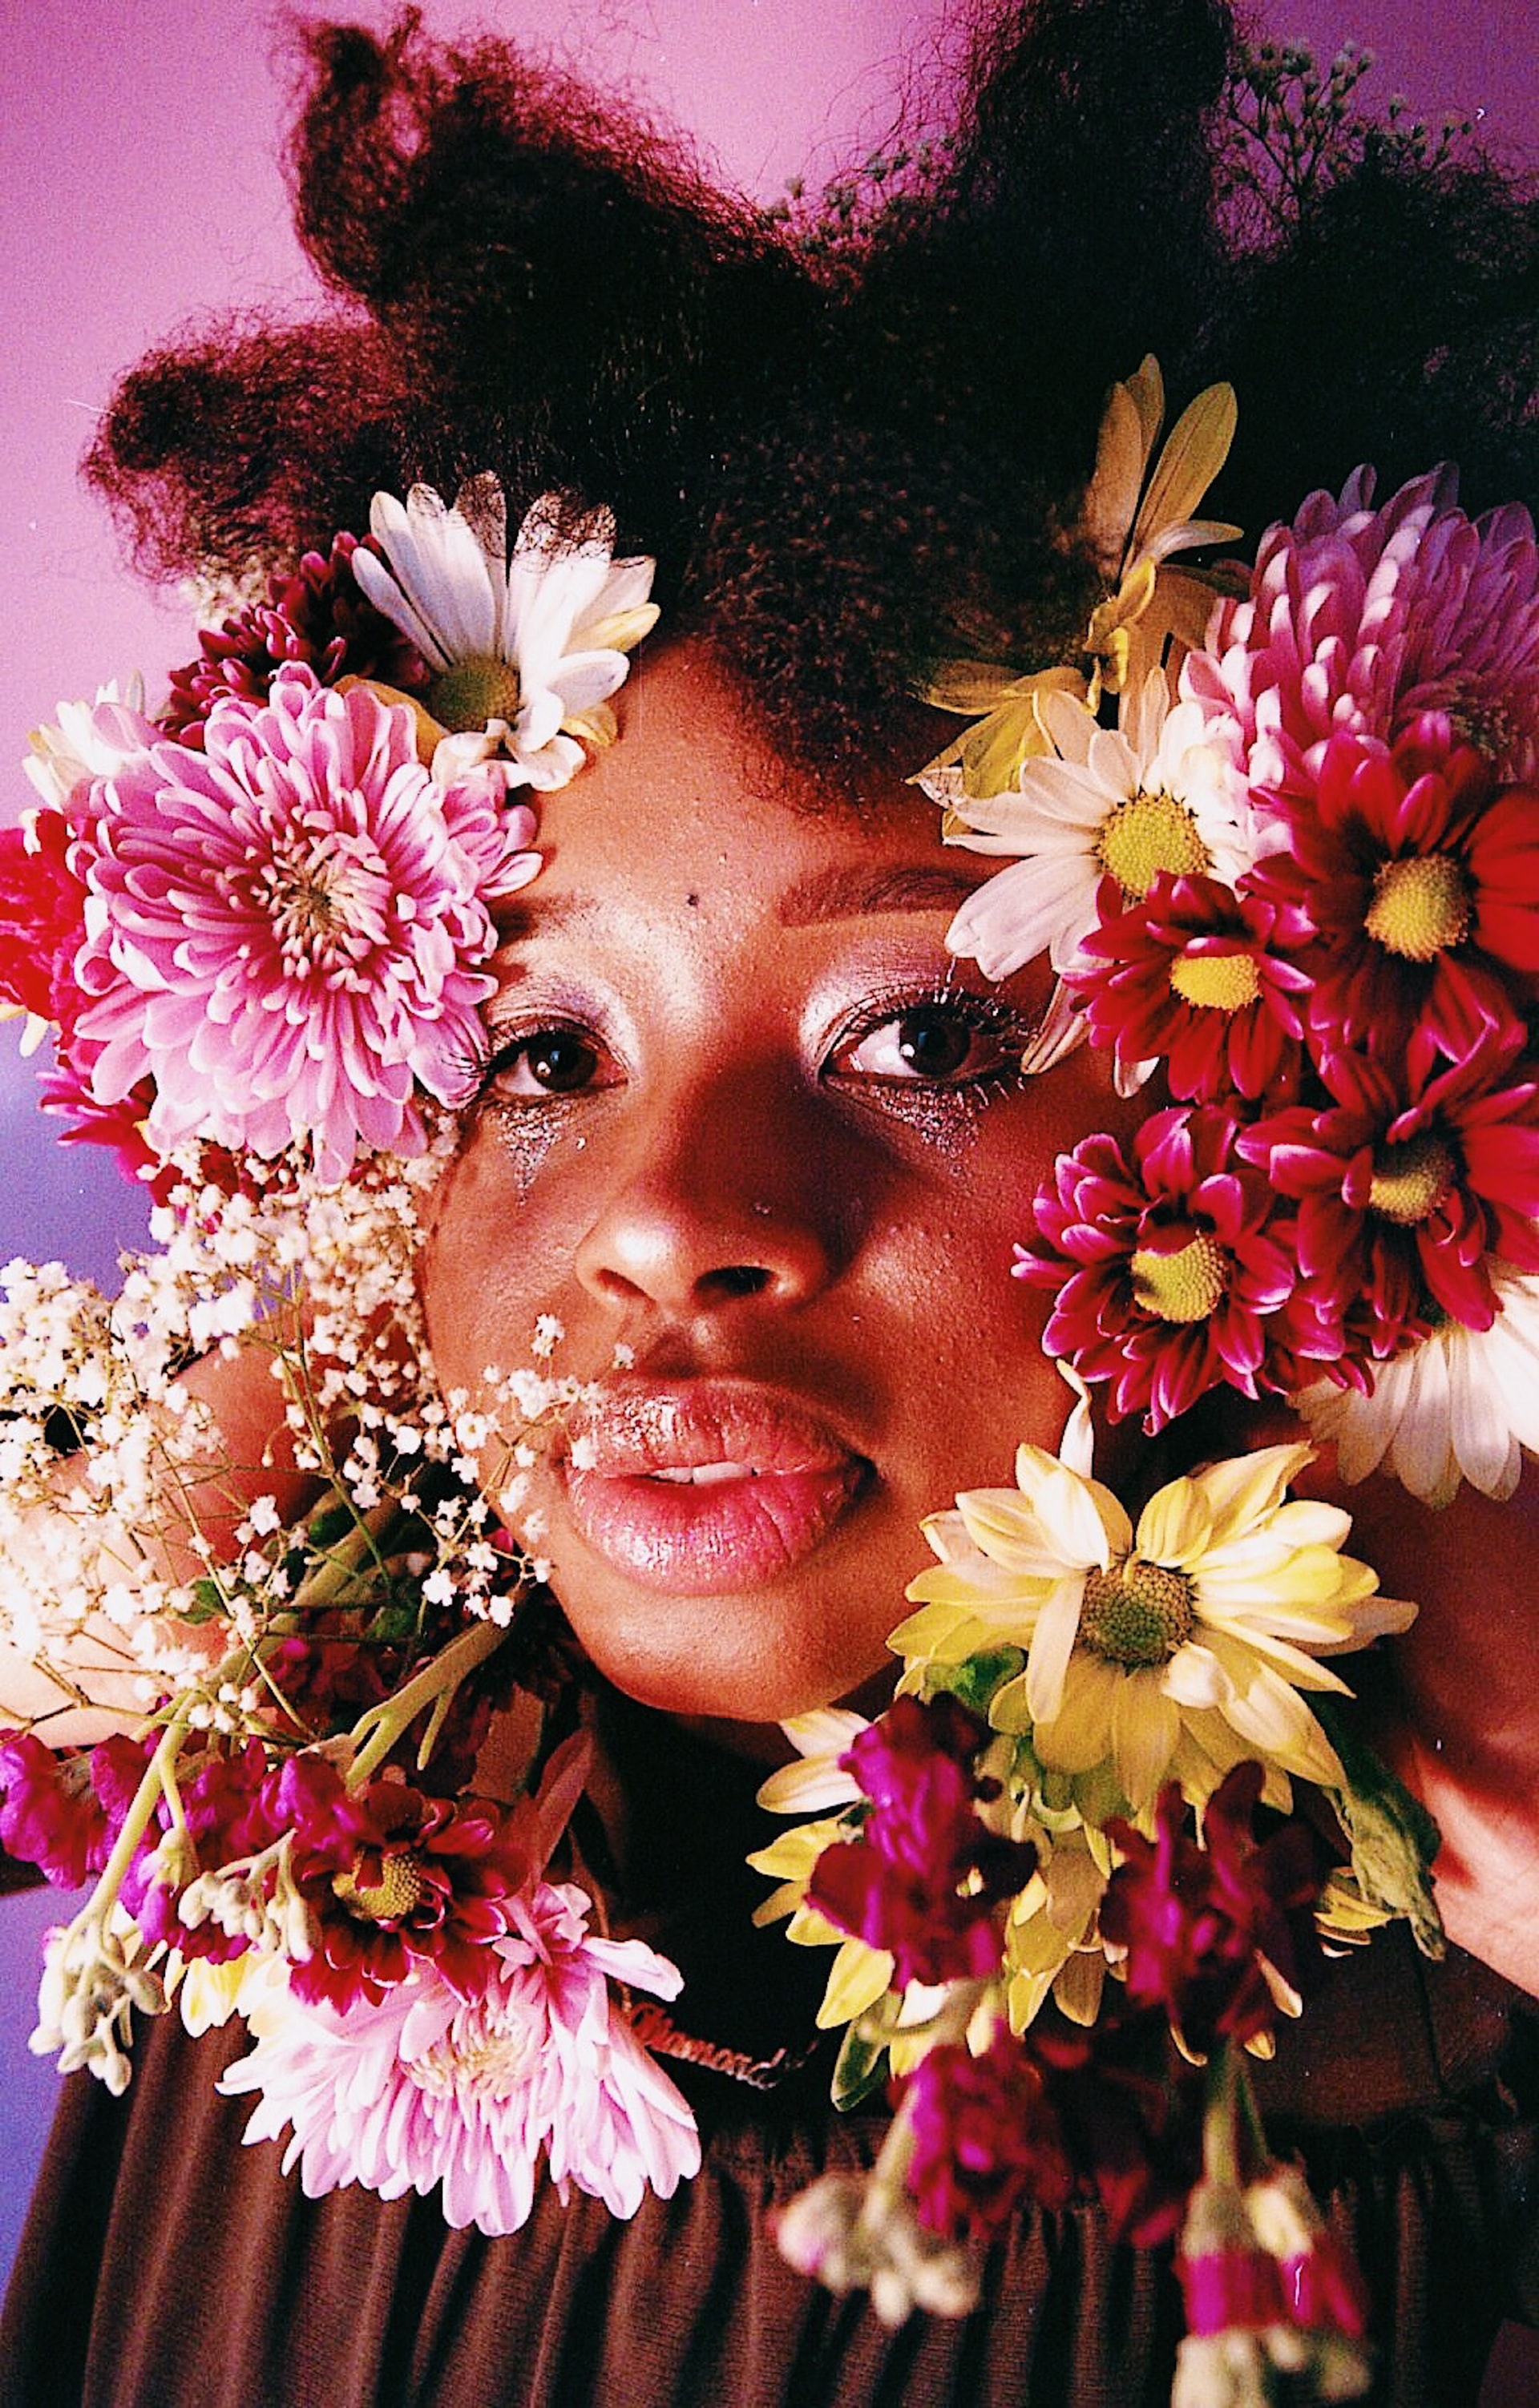 flowers on an African woman.